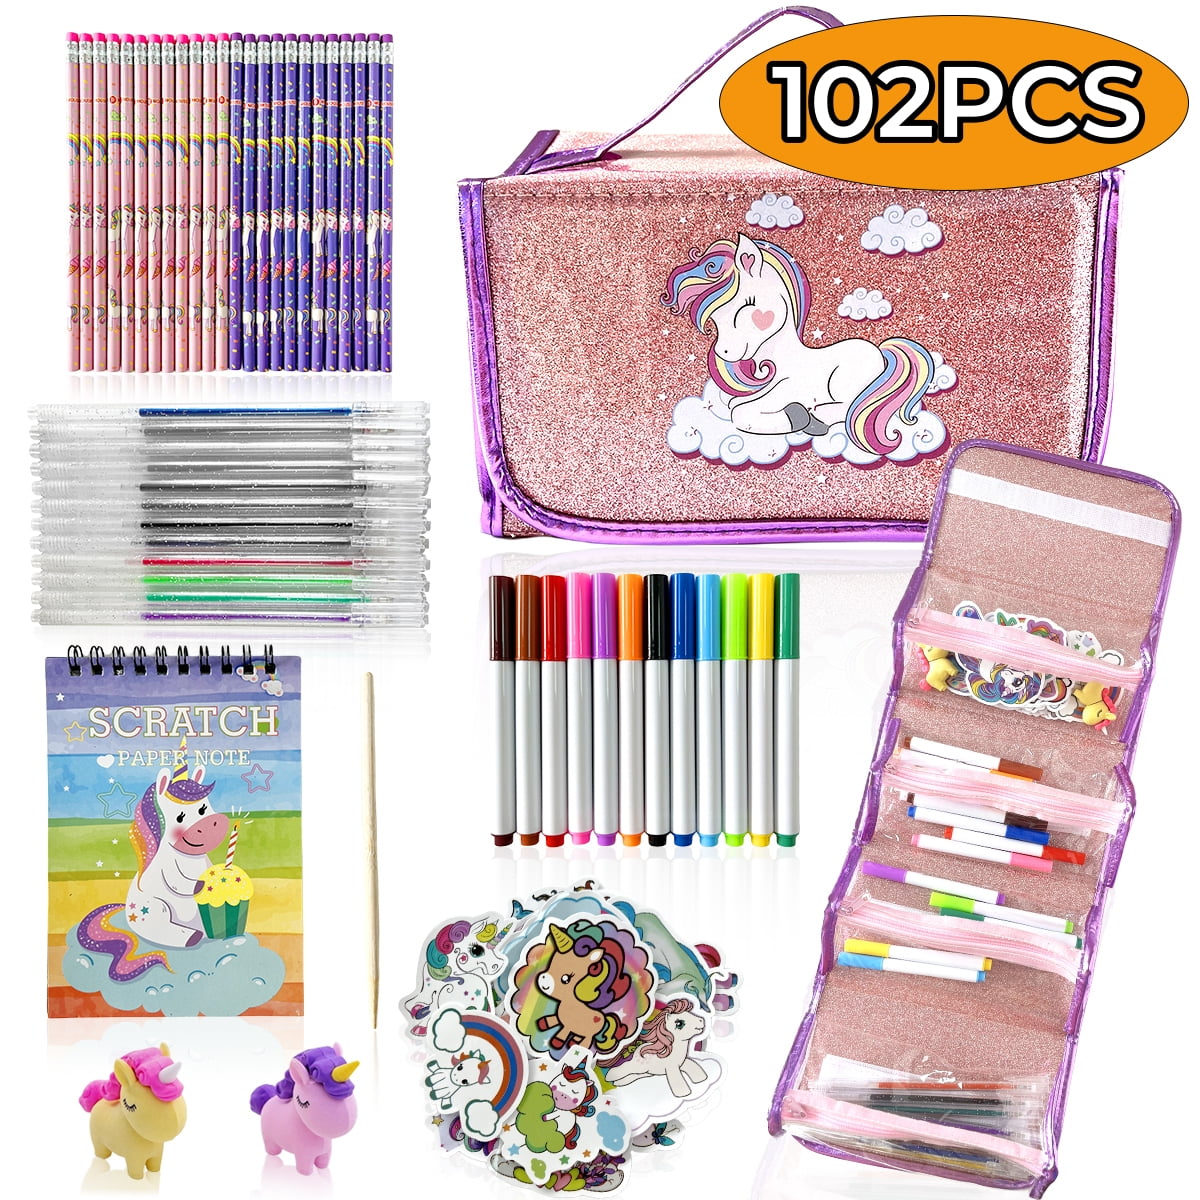 Sytle-carry Stationery Set Unicorns Gifts, 50 Pcs Filled Stationery with Unicorn Pencil Case Coloring Books Colored Pens Stickers, Arts and Crafts for